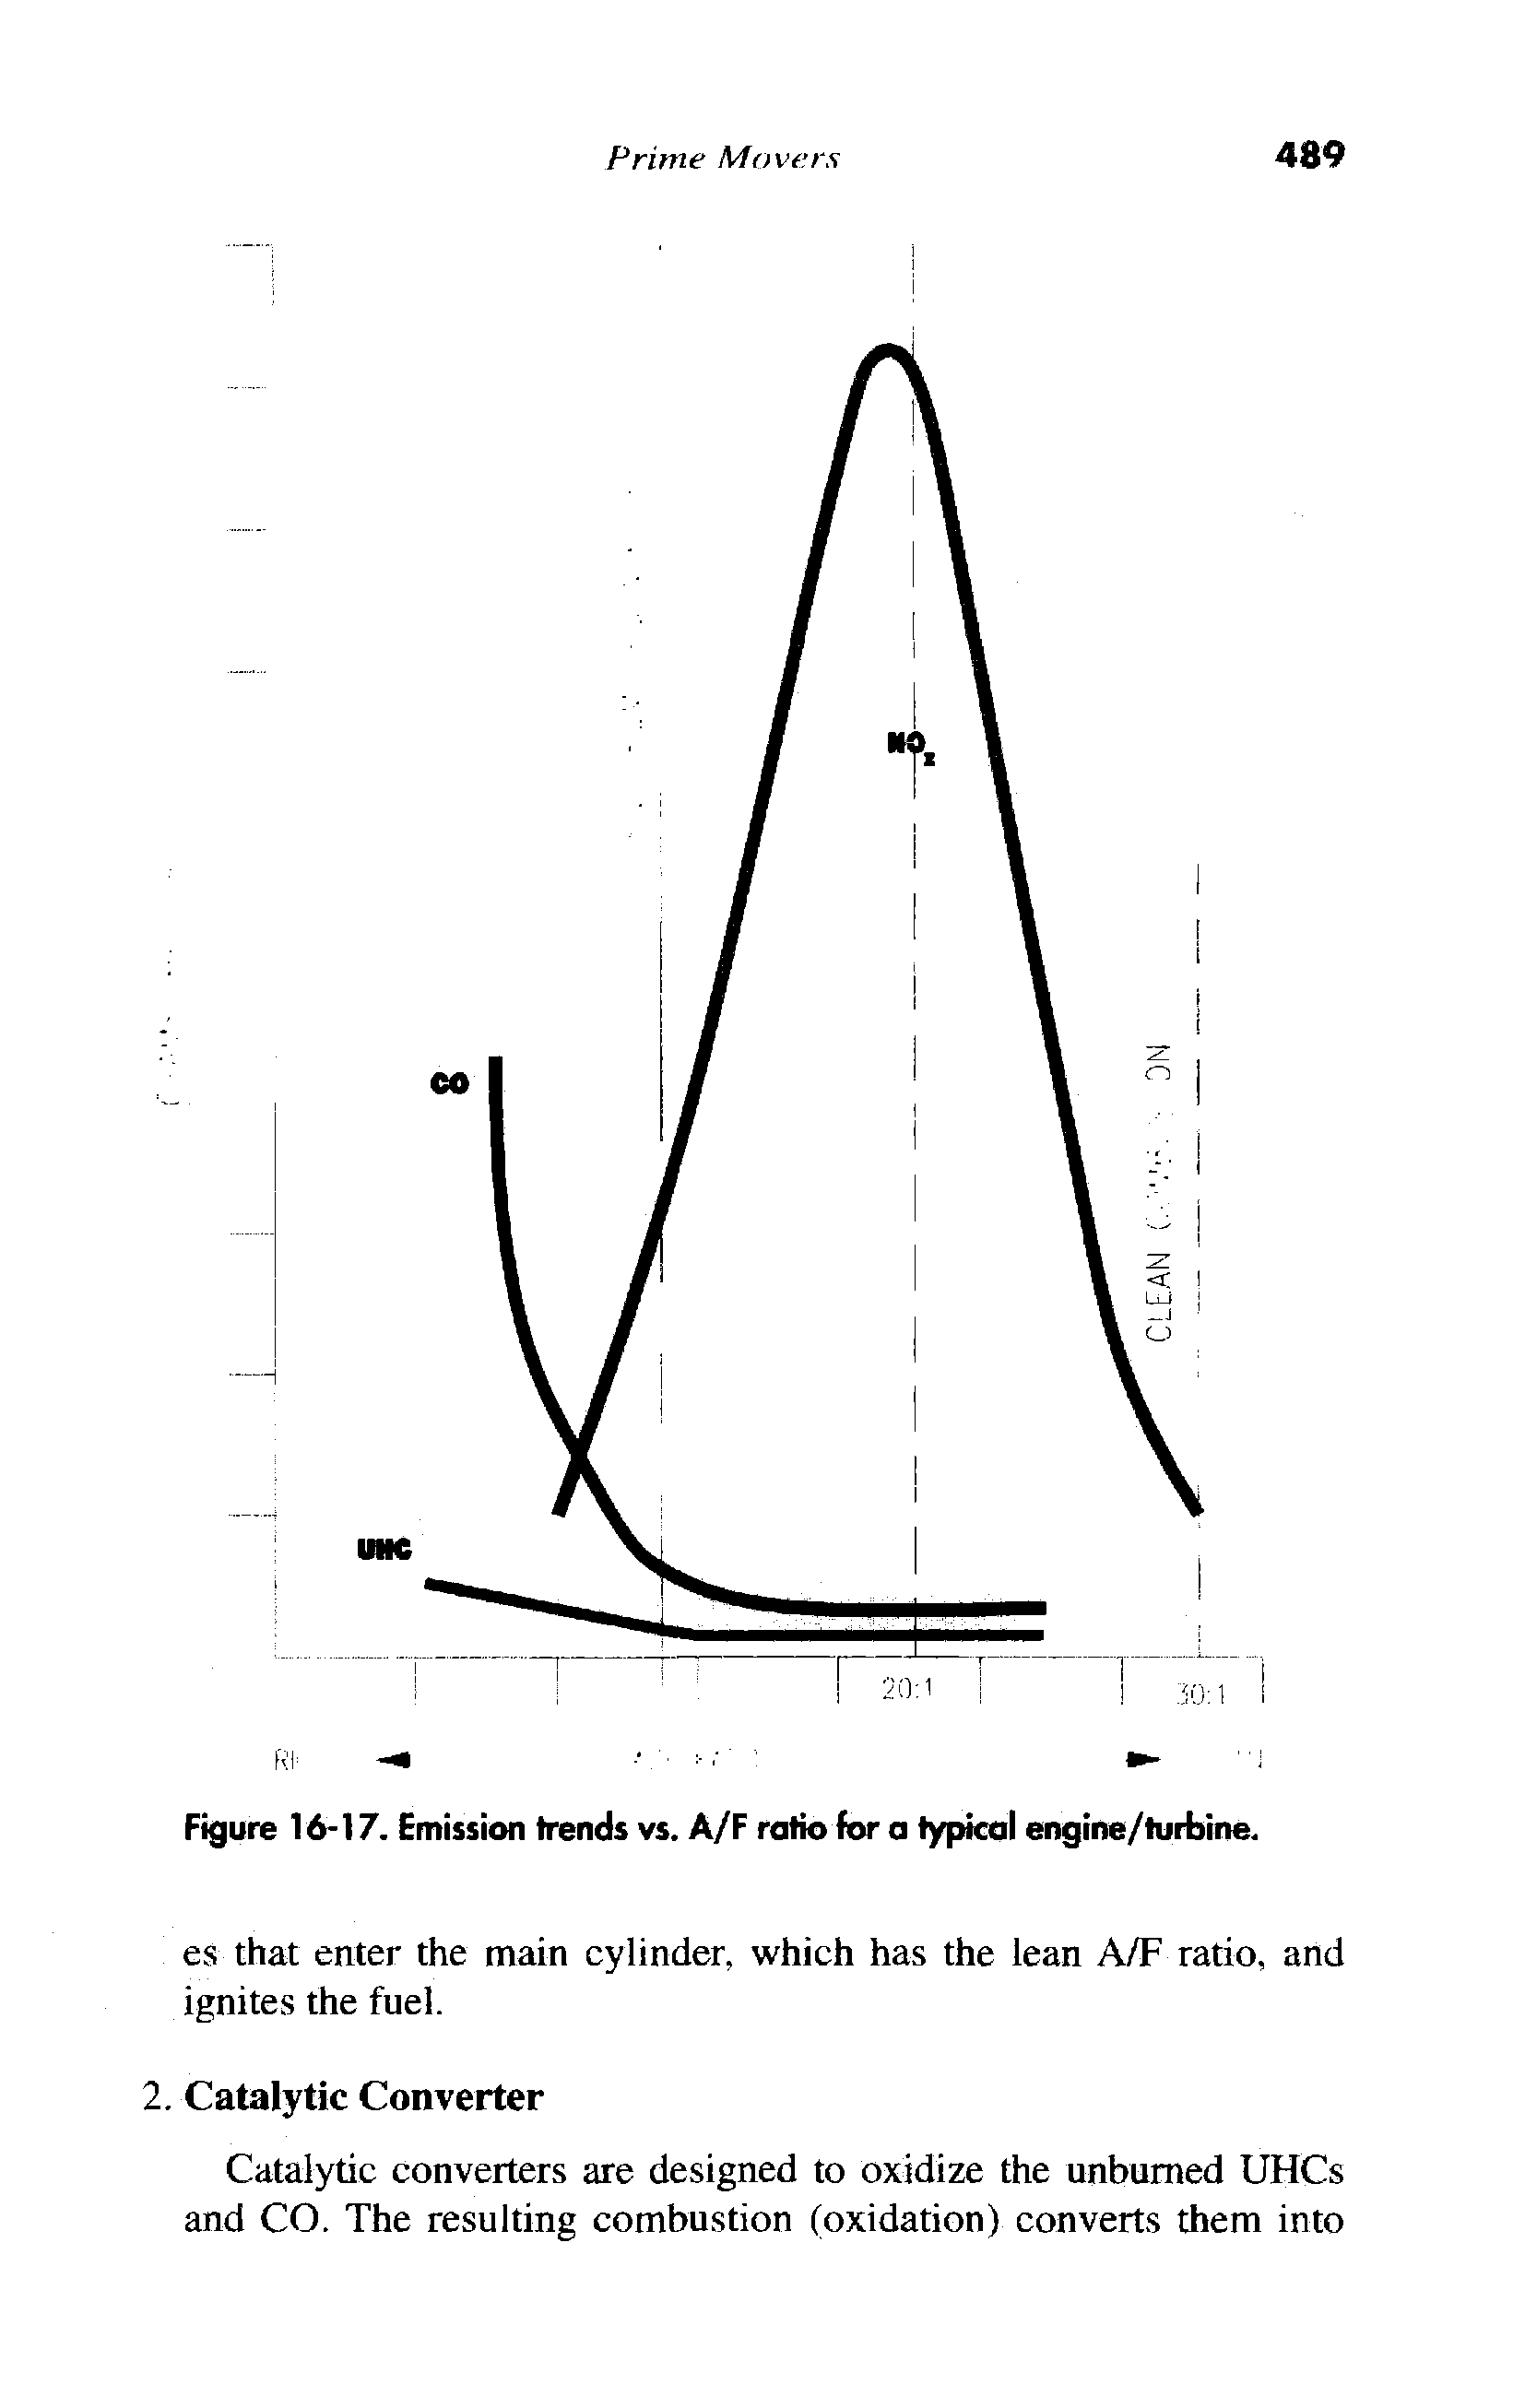 Figure 16-17. Emission trends vs. A/F ratio for a typical engine/turbine.